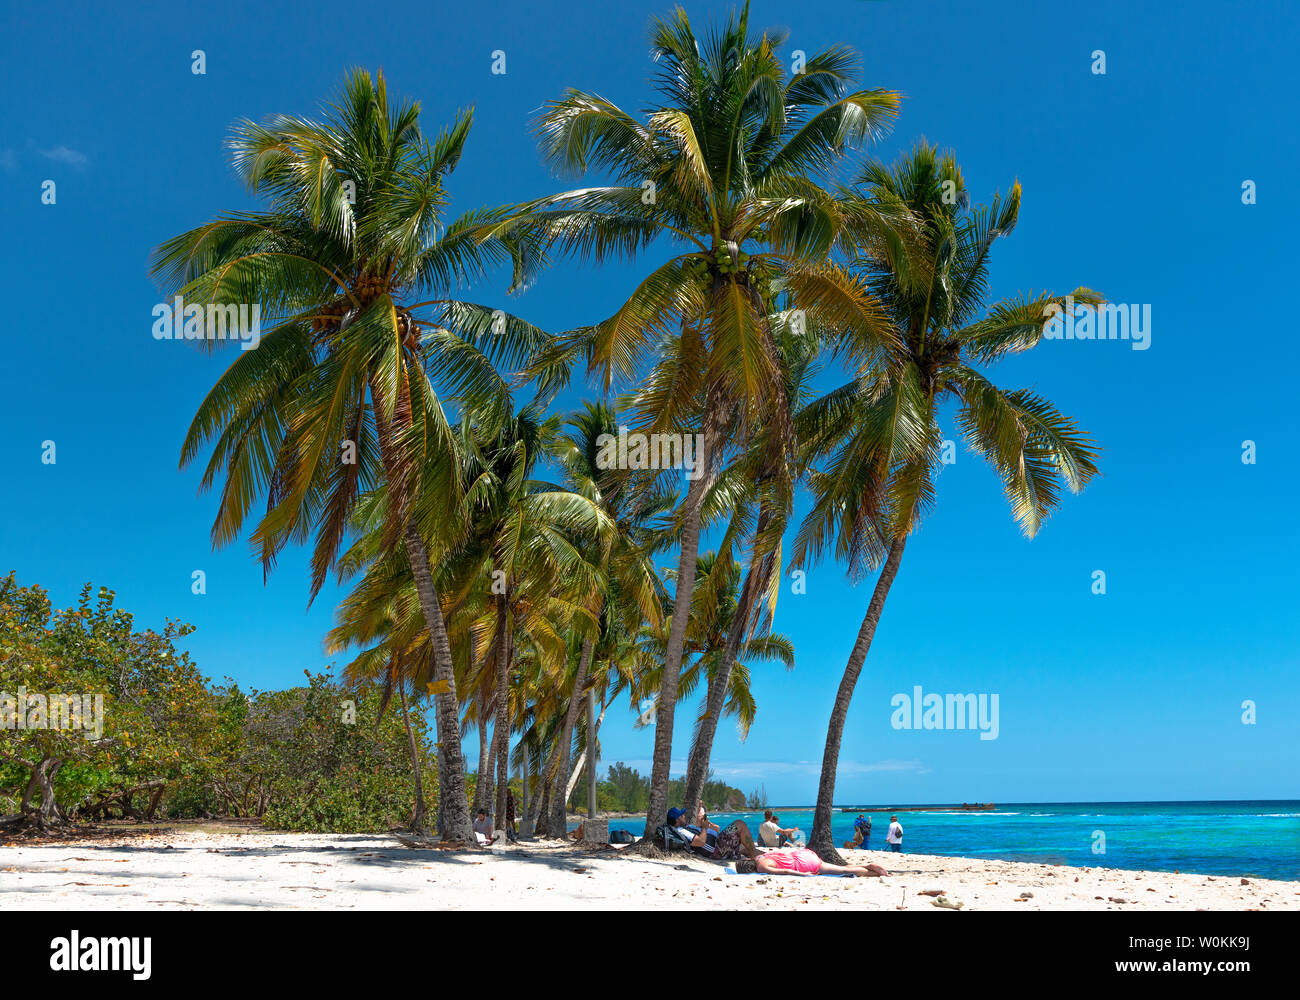 Playa Coco part of Playa Giron a beautiful white sand beach with turquoise sea and swaying palm trees in Pinar del Rio Province, Cuba, Caribbean Stock Photo